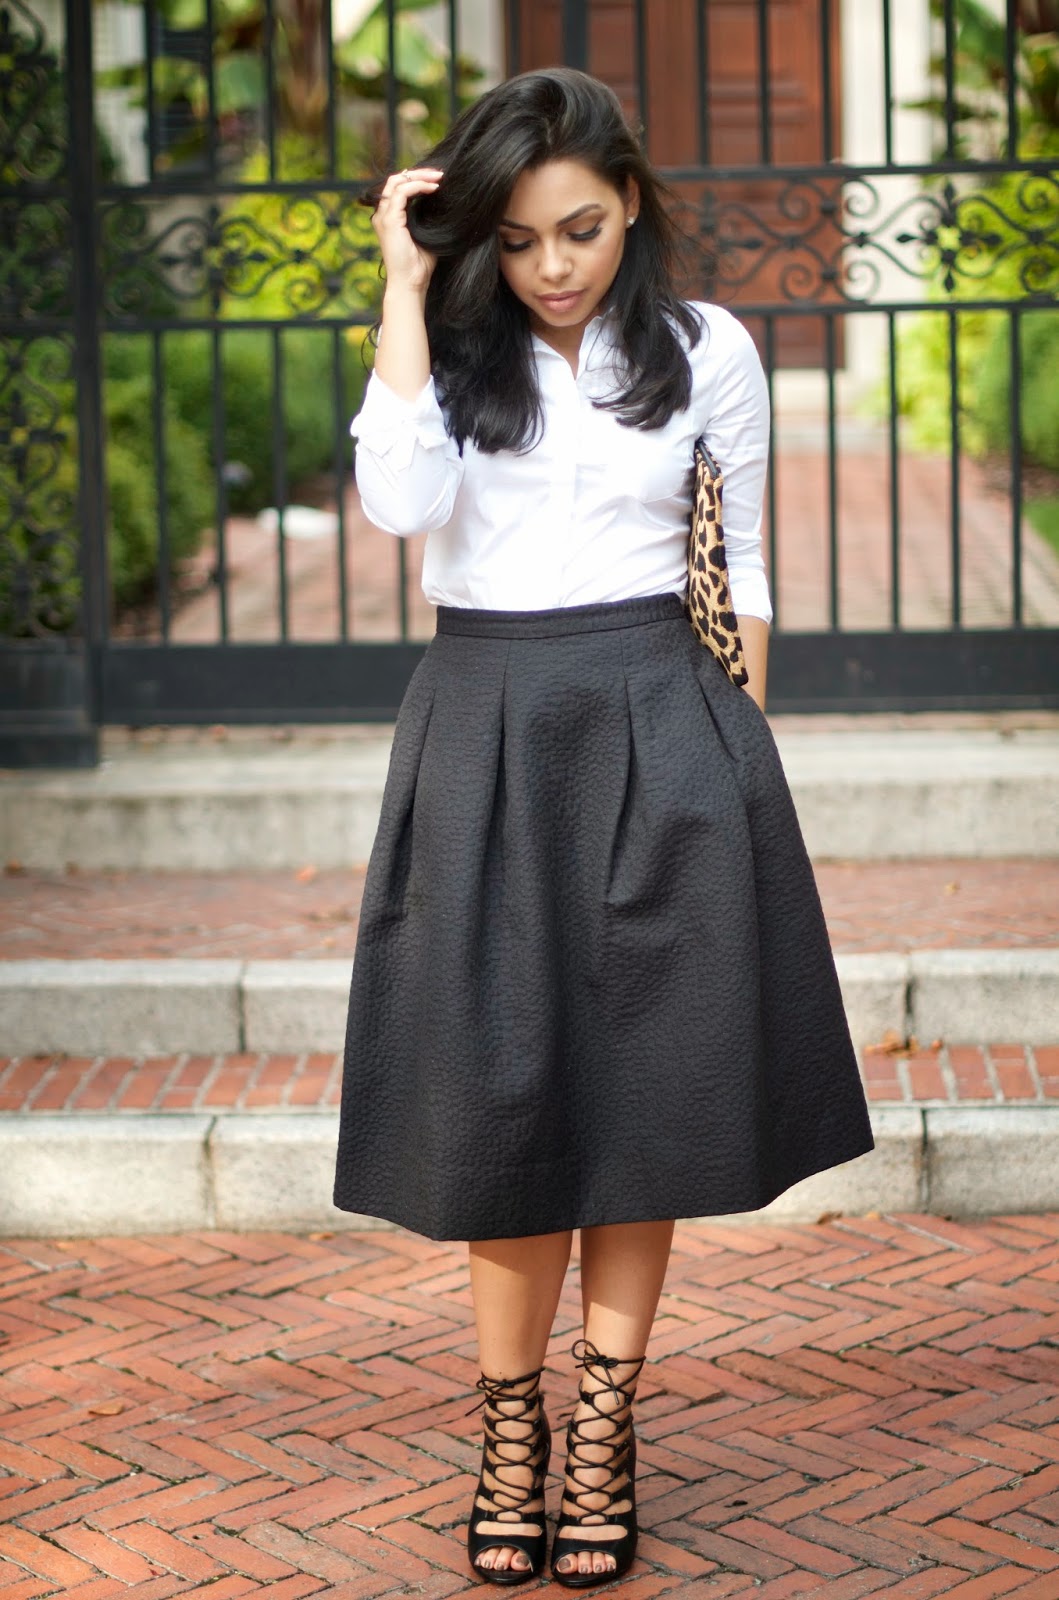 Classic Look featuring Midi Skirt | The Style Brunch